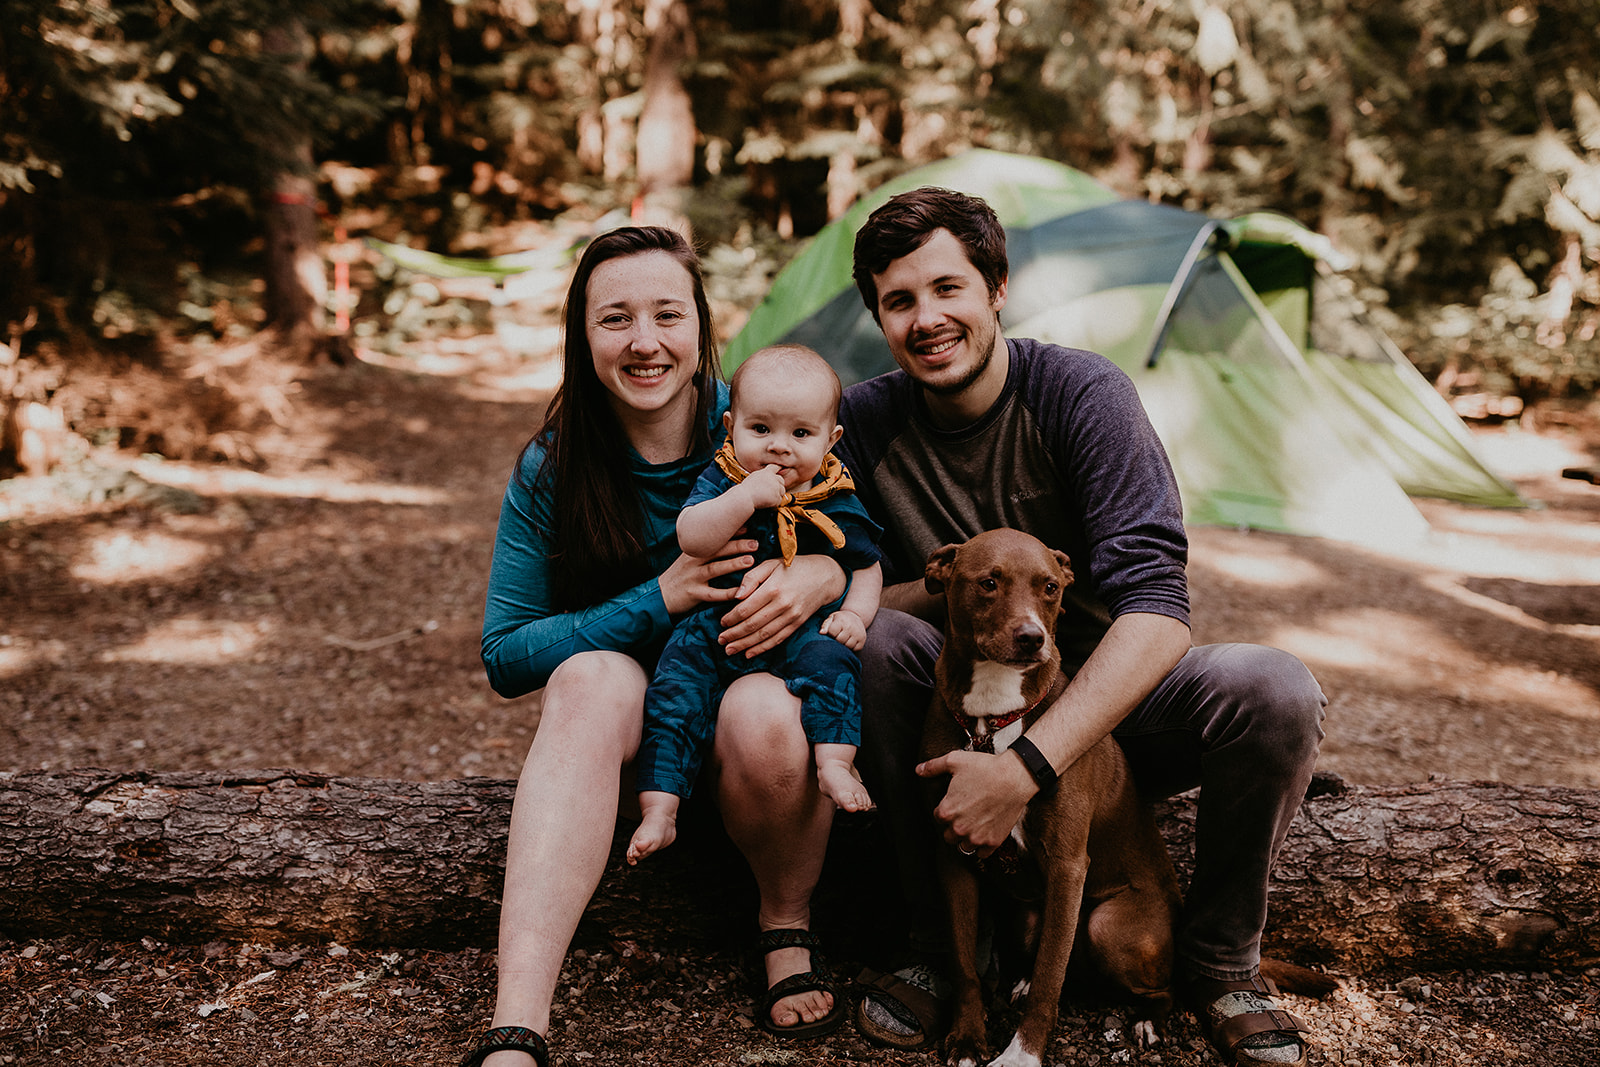 kachess-lake-camping-family-portraits-megan-gallagher-photography_(146_of_335).jpg